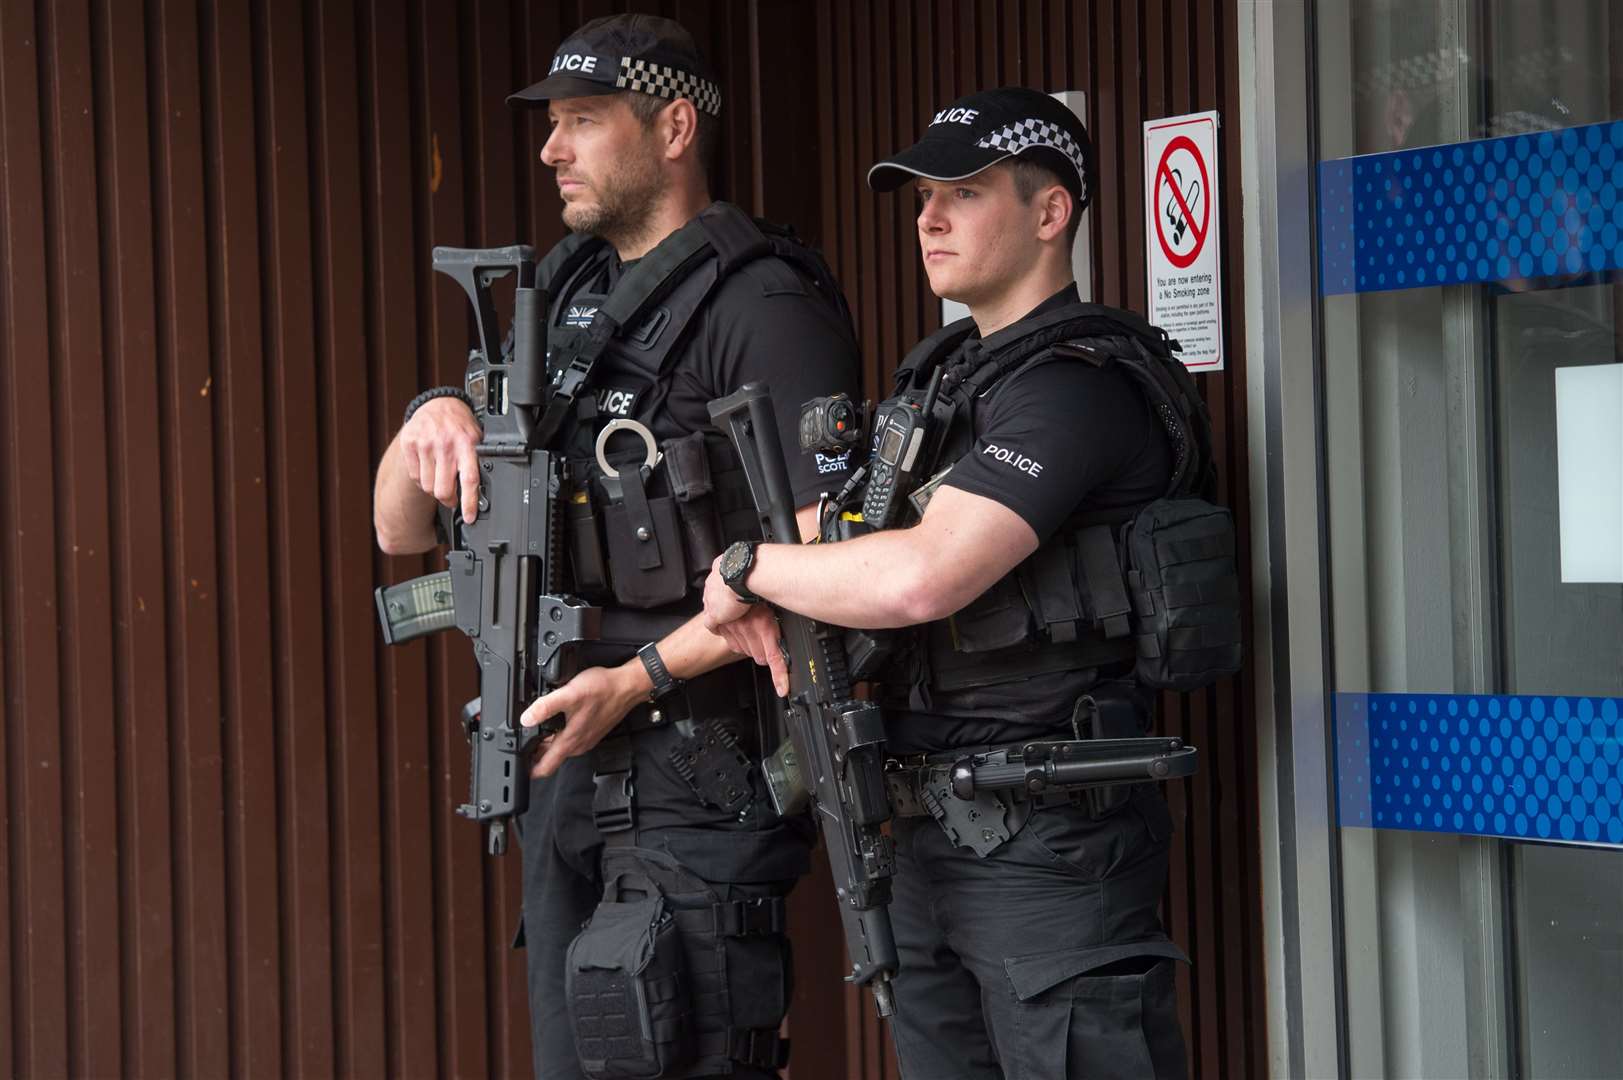 Armed police outside Inverness Railway Station. Picture: Callum Mackay.